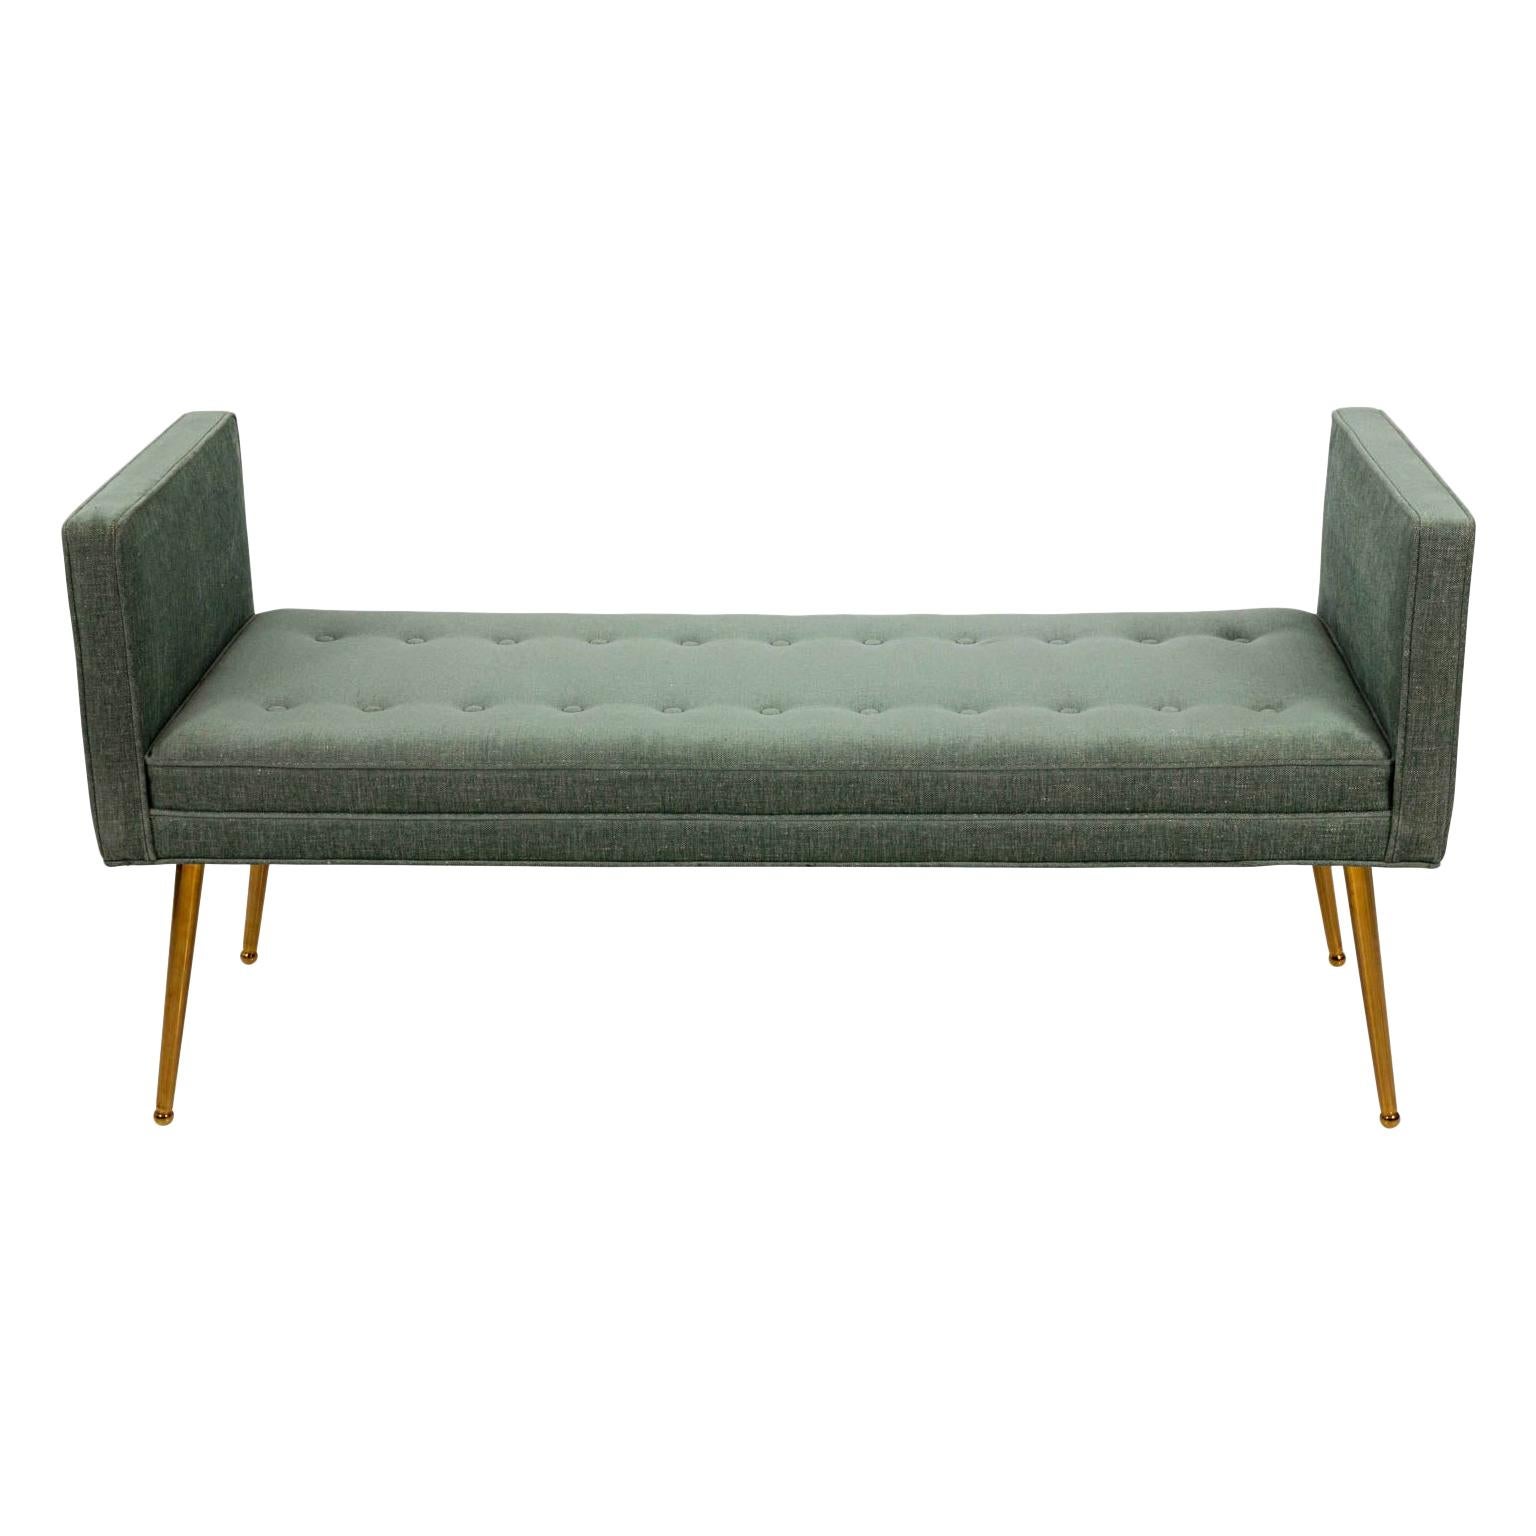 Midcentury Style Upholstered Bench For Sale